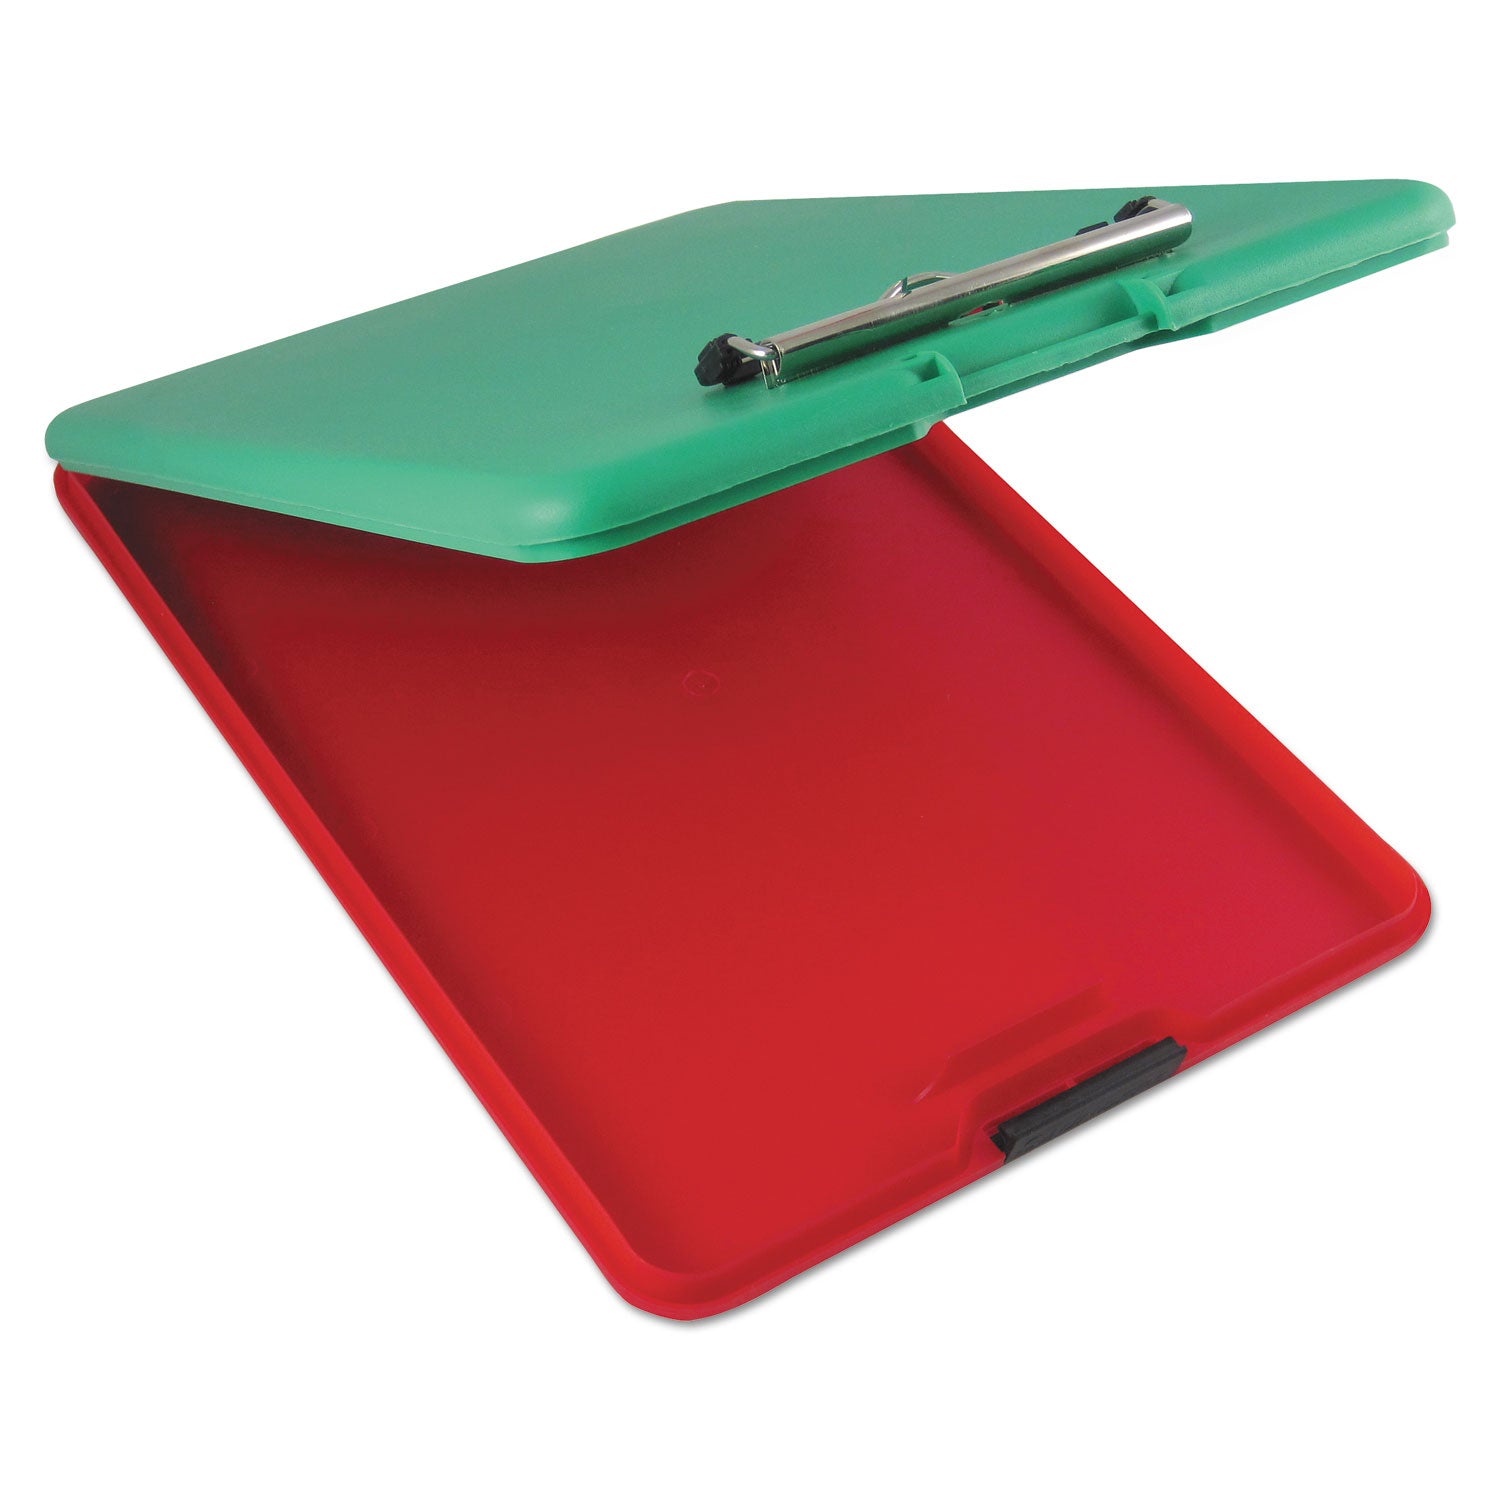 SlimMate Show2Know Safety Organizer, 0.5" Clip Capacity, Holds 8.5 x 11 Sheets, Red/Green - 